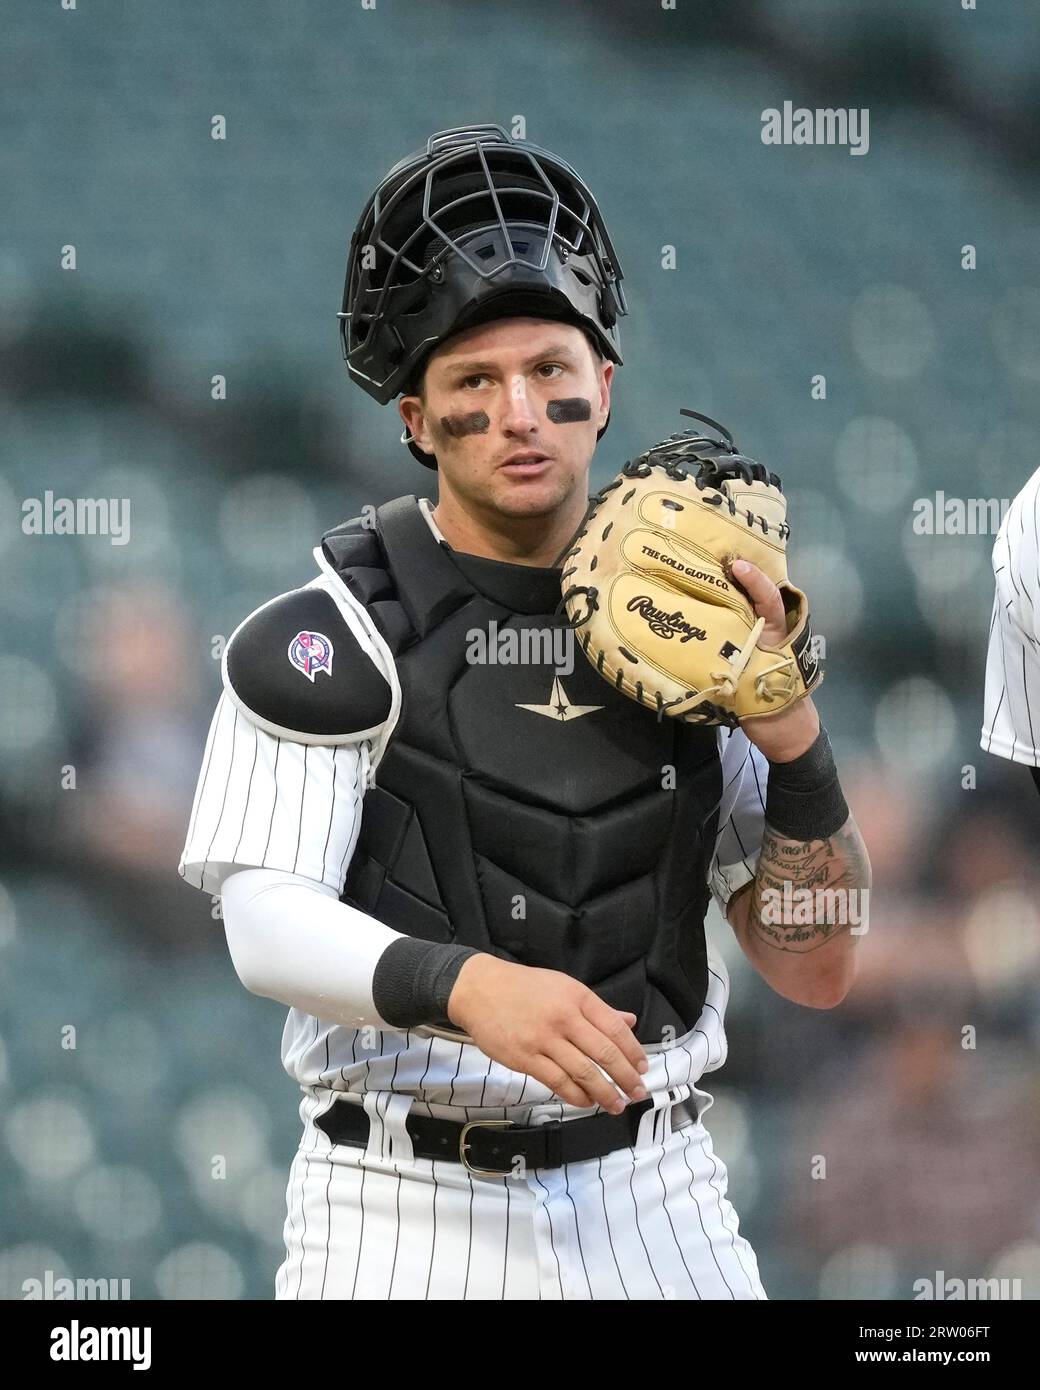 Chicago White Sox catcher Korey Lee returns to home plate after a